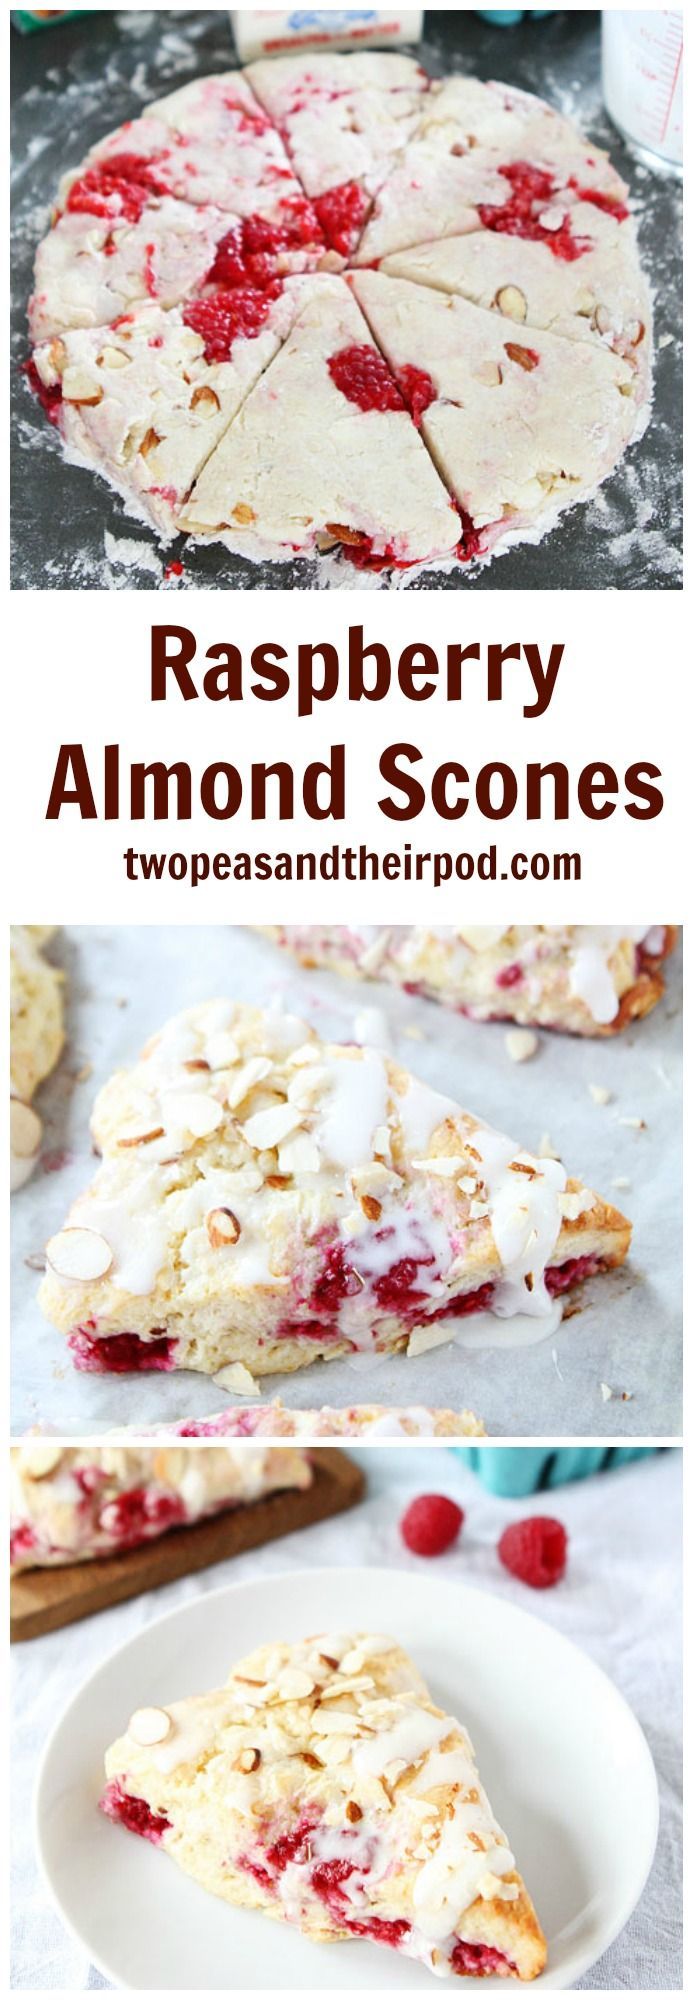 Raspberry Almond Scones Recipe on twopeasandtheirpod.com This is the BEST scone recipe! The scones are great for breakfast, brunch, or anytime! -   20 baking recipes scones
 ideas